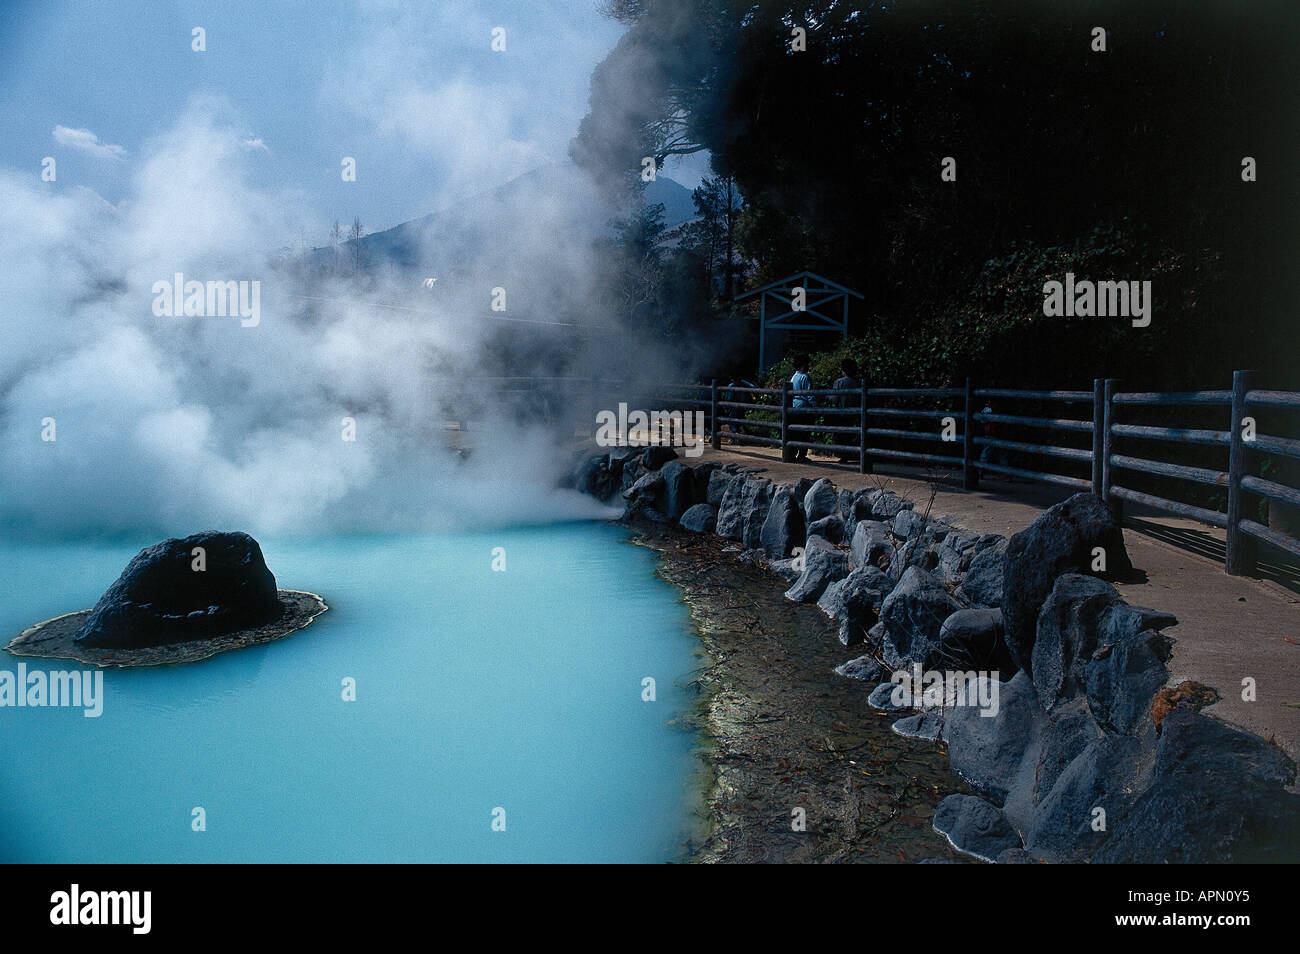 Clouds of steam rising from the milky blue waters of one of the eight hot springs known as Jigoku Hell Pools in which the waters reach boiling point at the hot spring holiday centre of Beppu with rocks forming a border around the pool Stock Photo